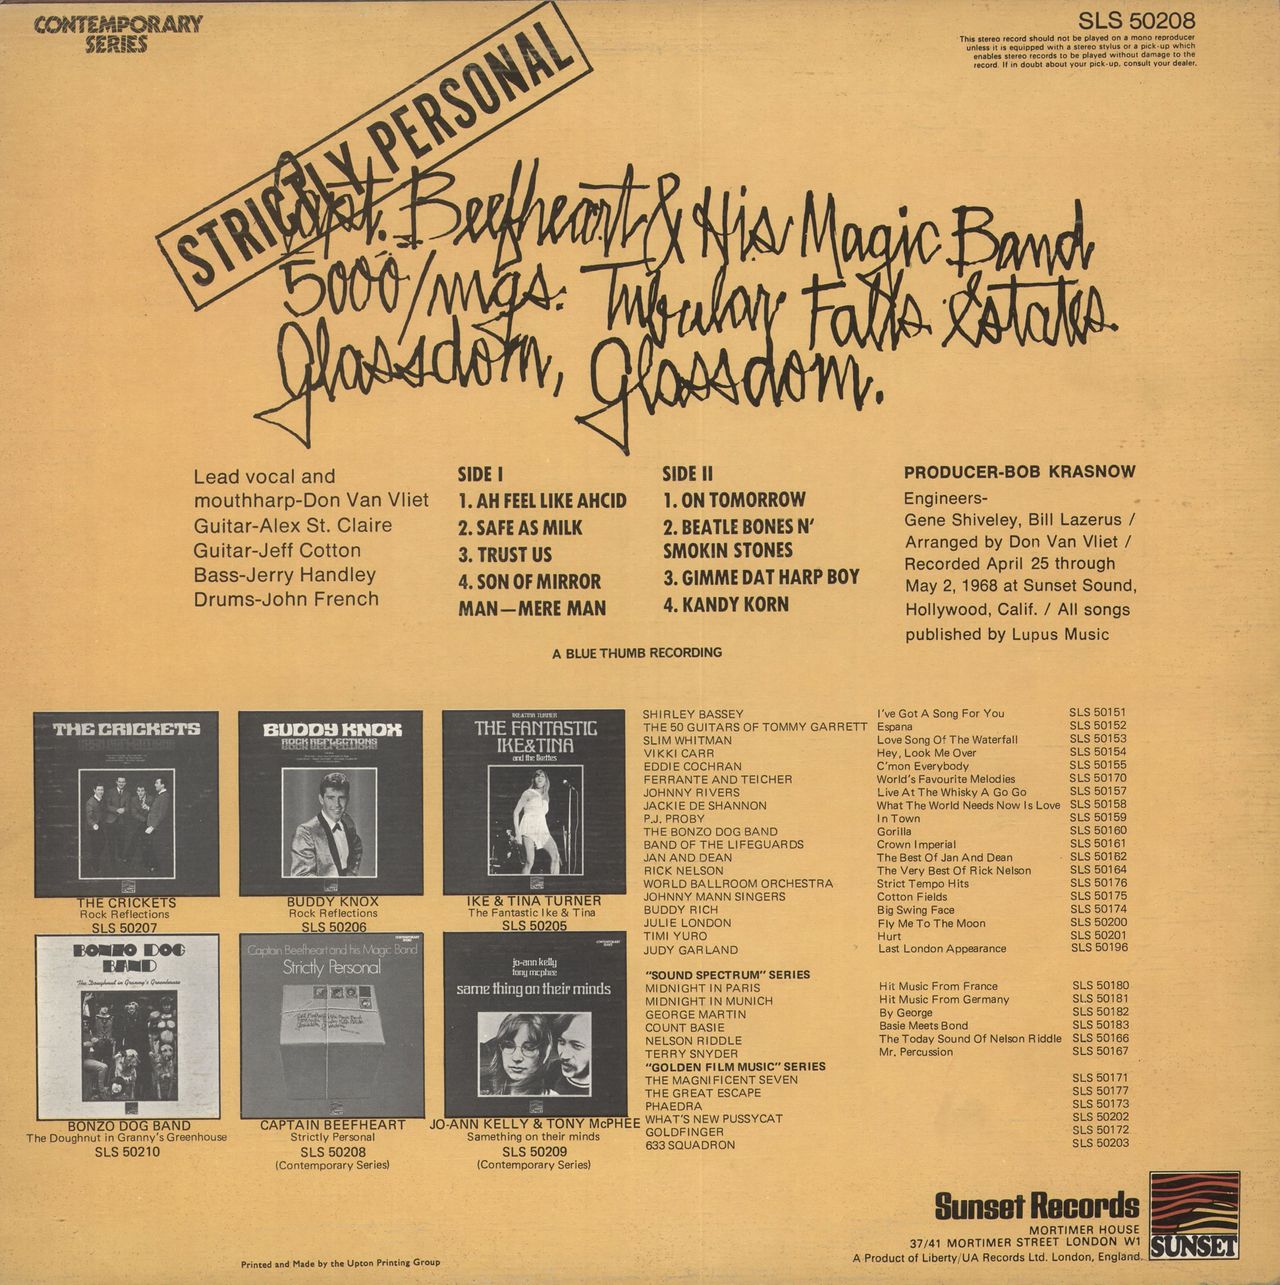 Captain Beefheart  Magic Band Strictly Personal Textured Sleeve UK — 